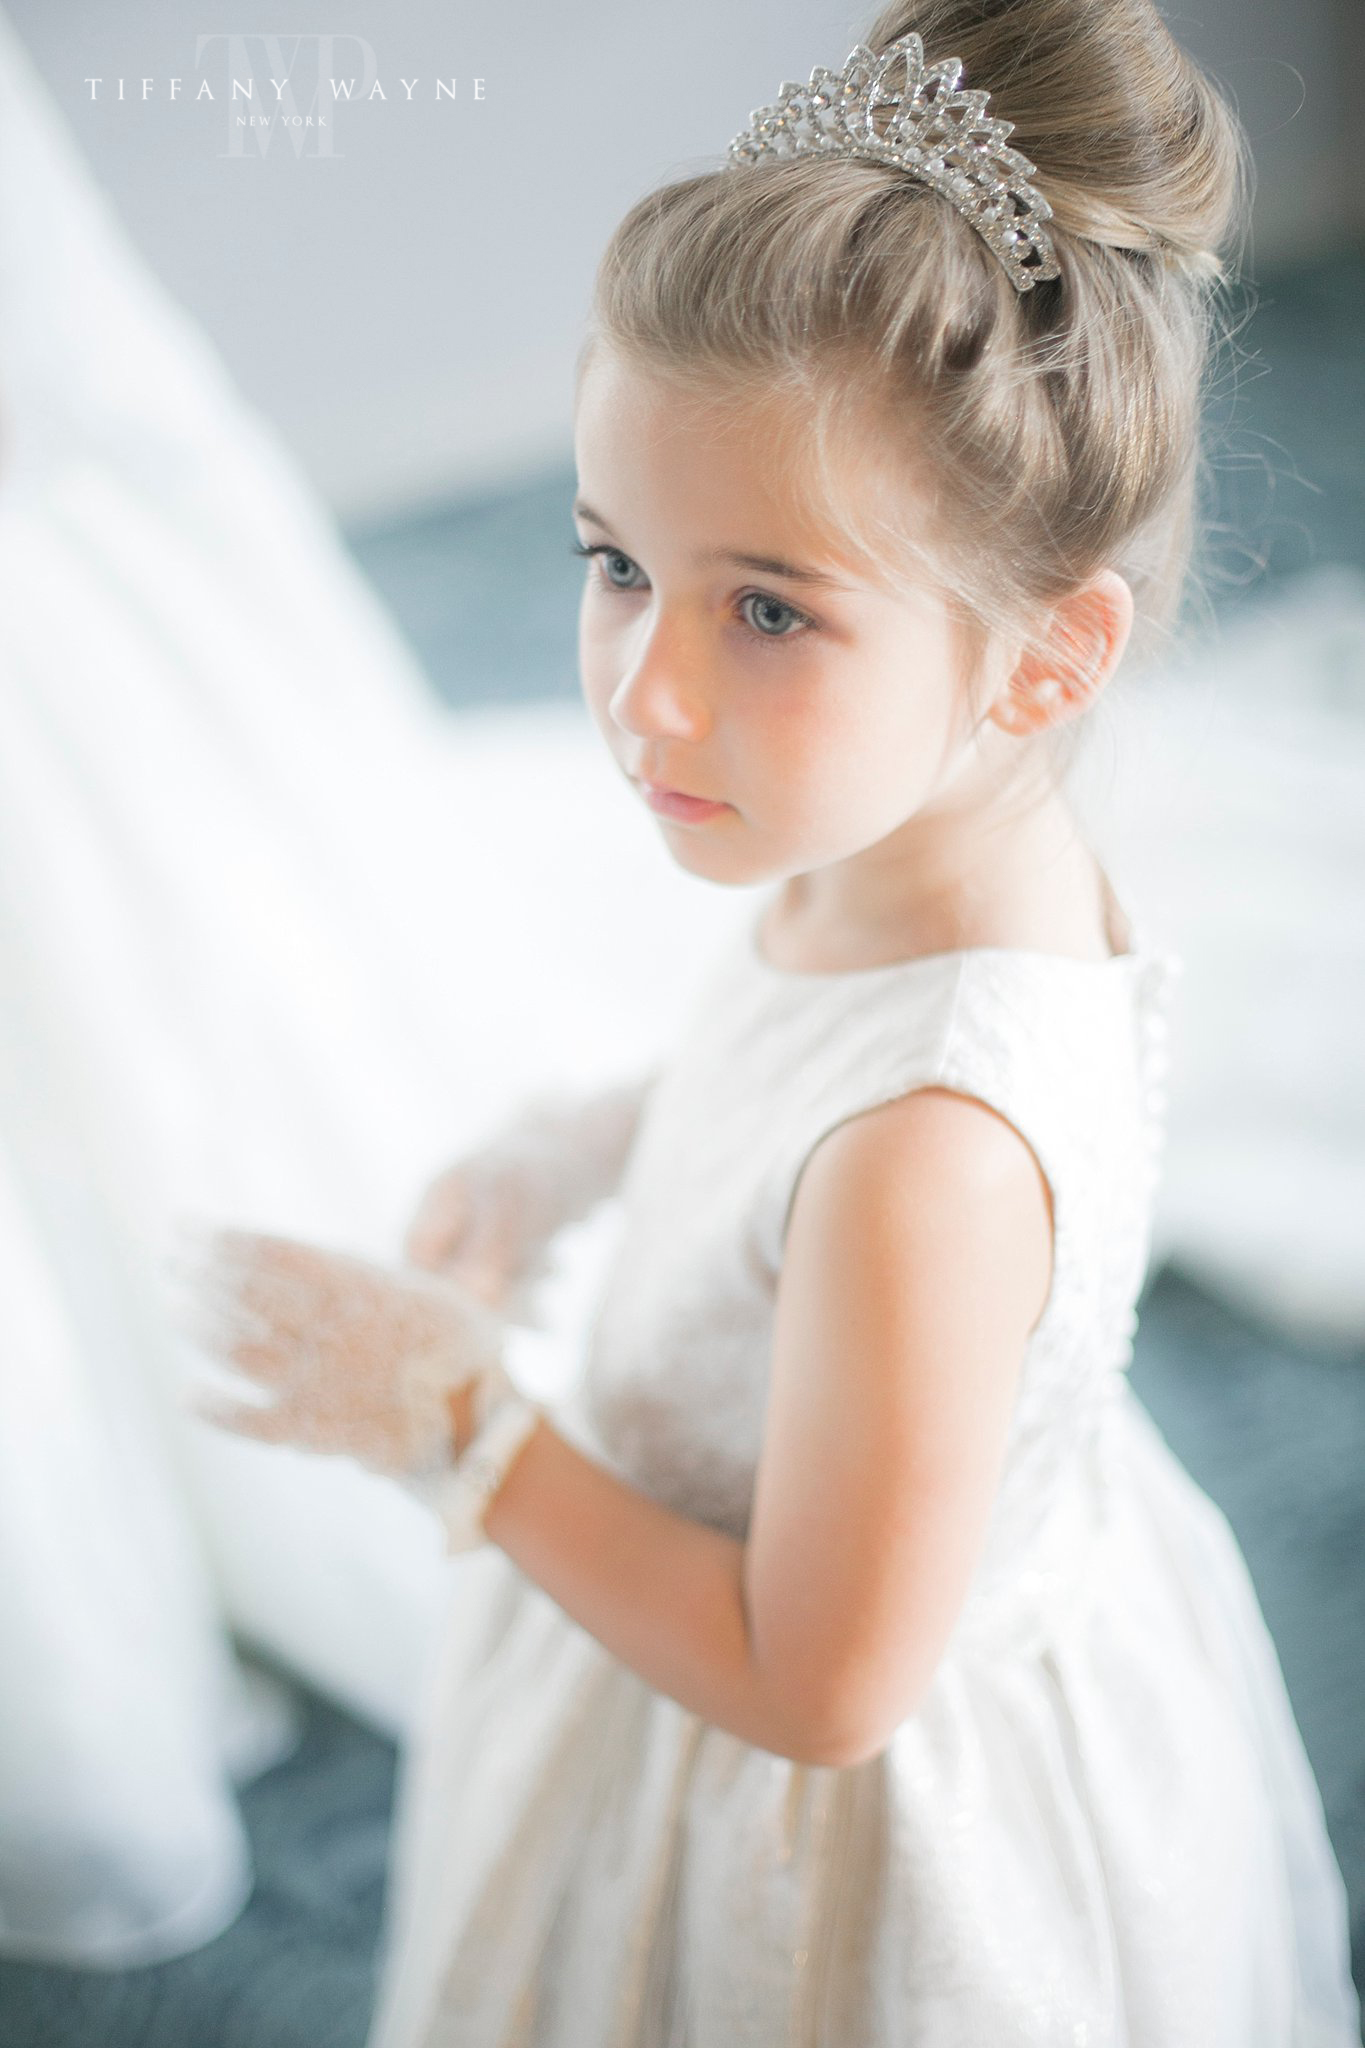 flower girl watches bride on Albany NY wedding day photographed by Tiffany Wayne Photography